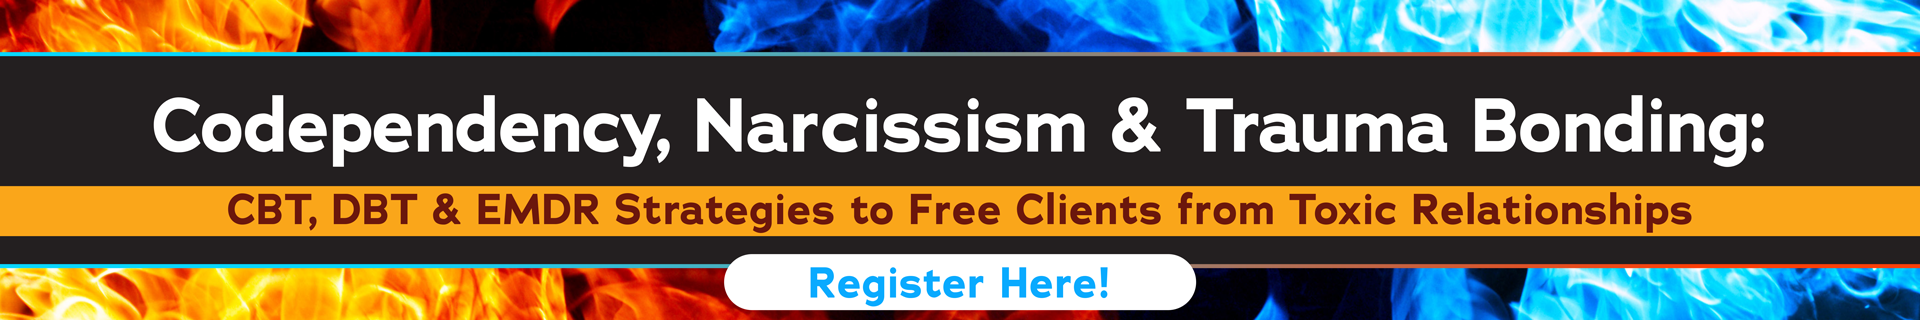 Codependency, Narcissism & Trauma Bonding: CBT, DBT & EMDR Strategies to Free Clients from Toxic Relationships